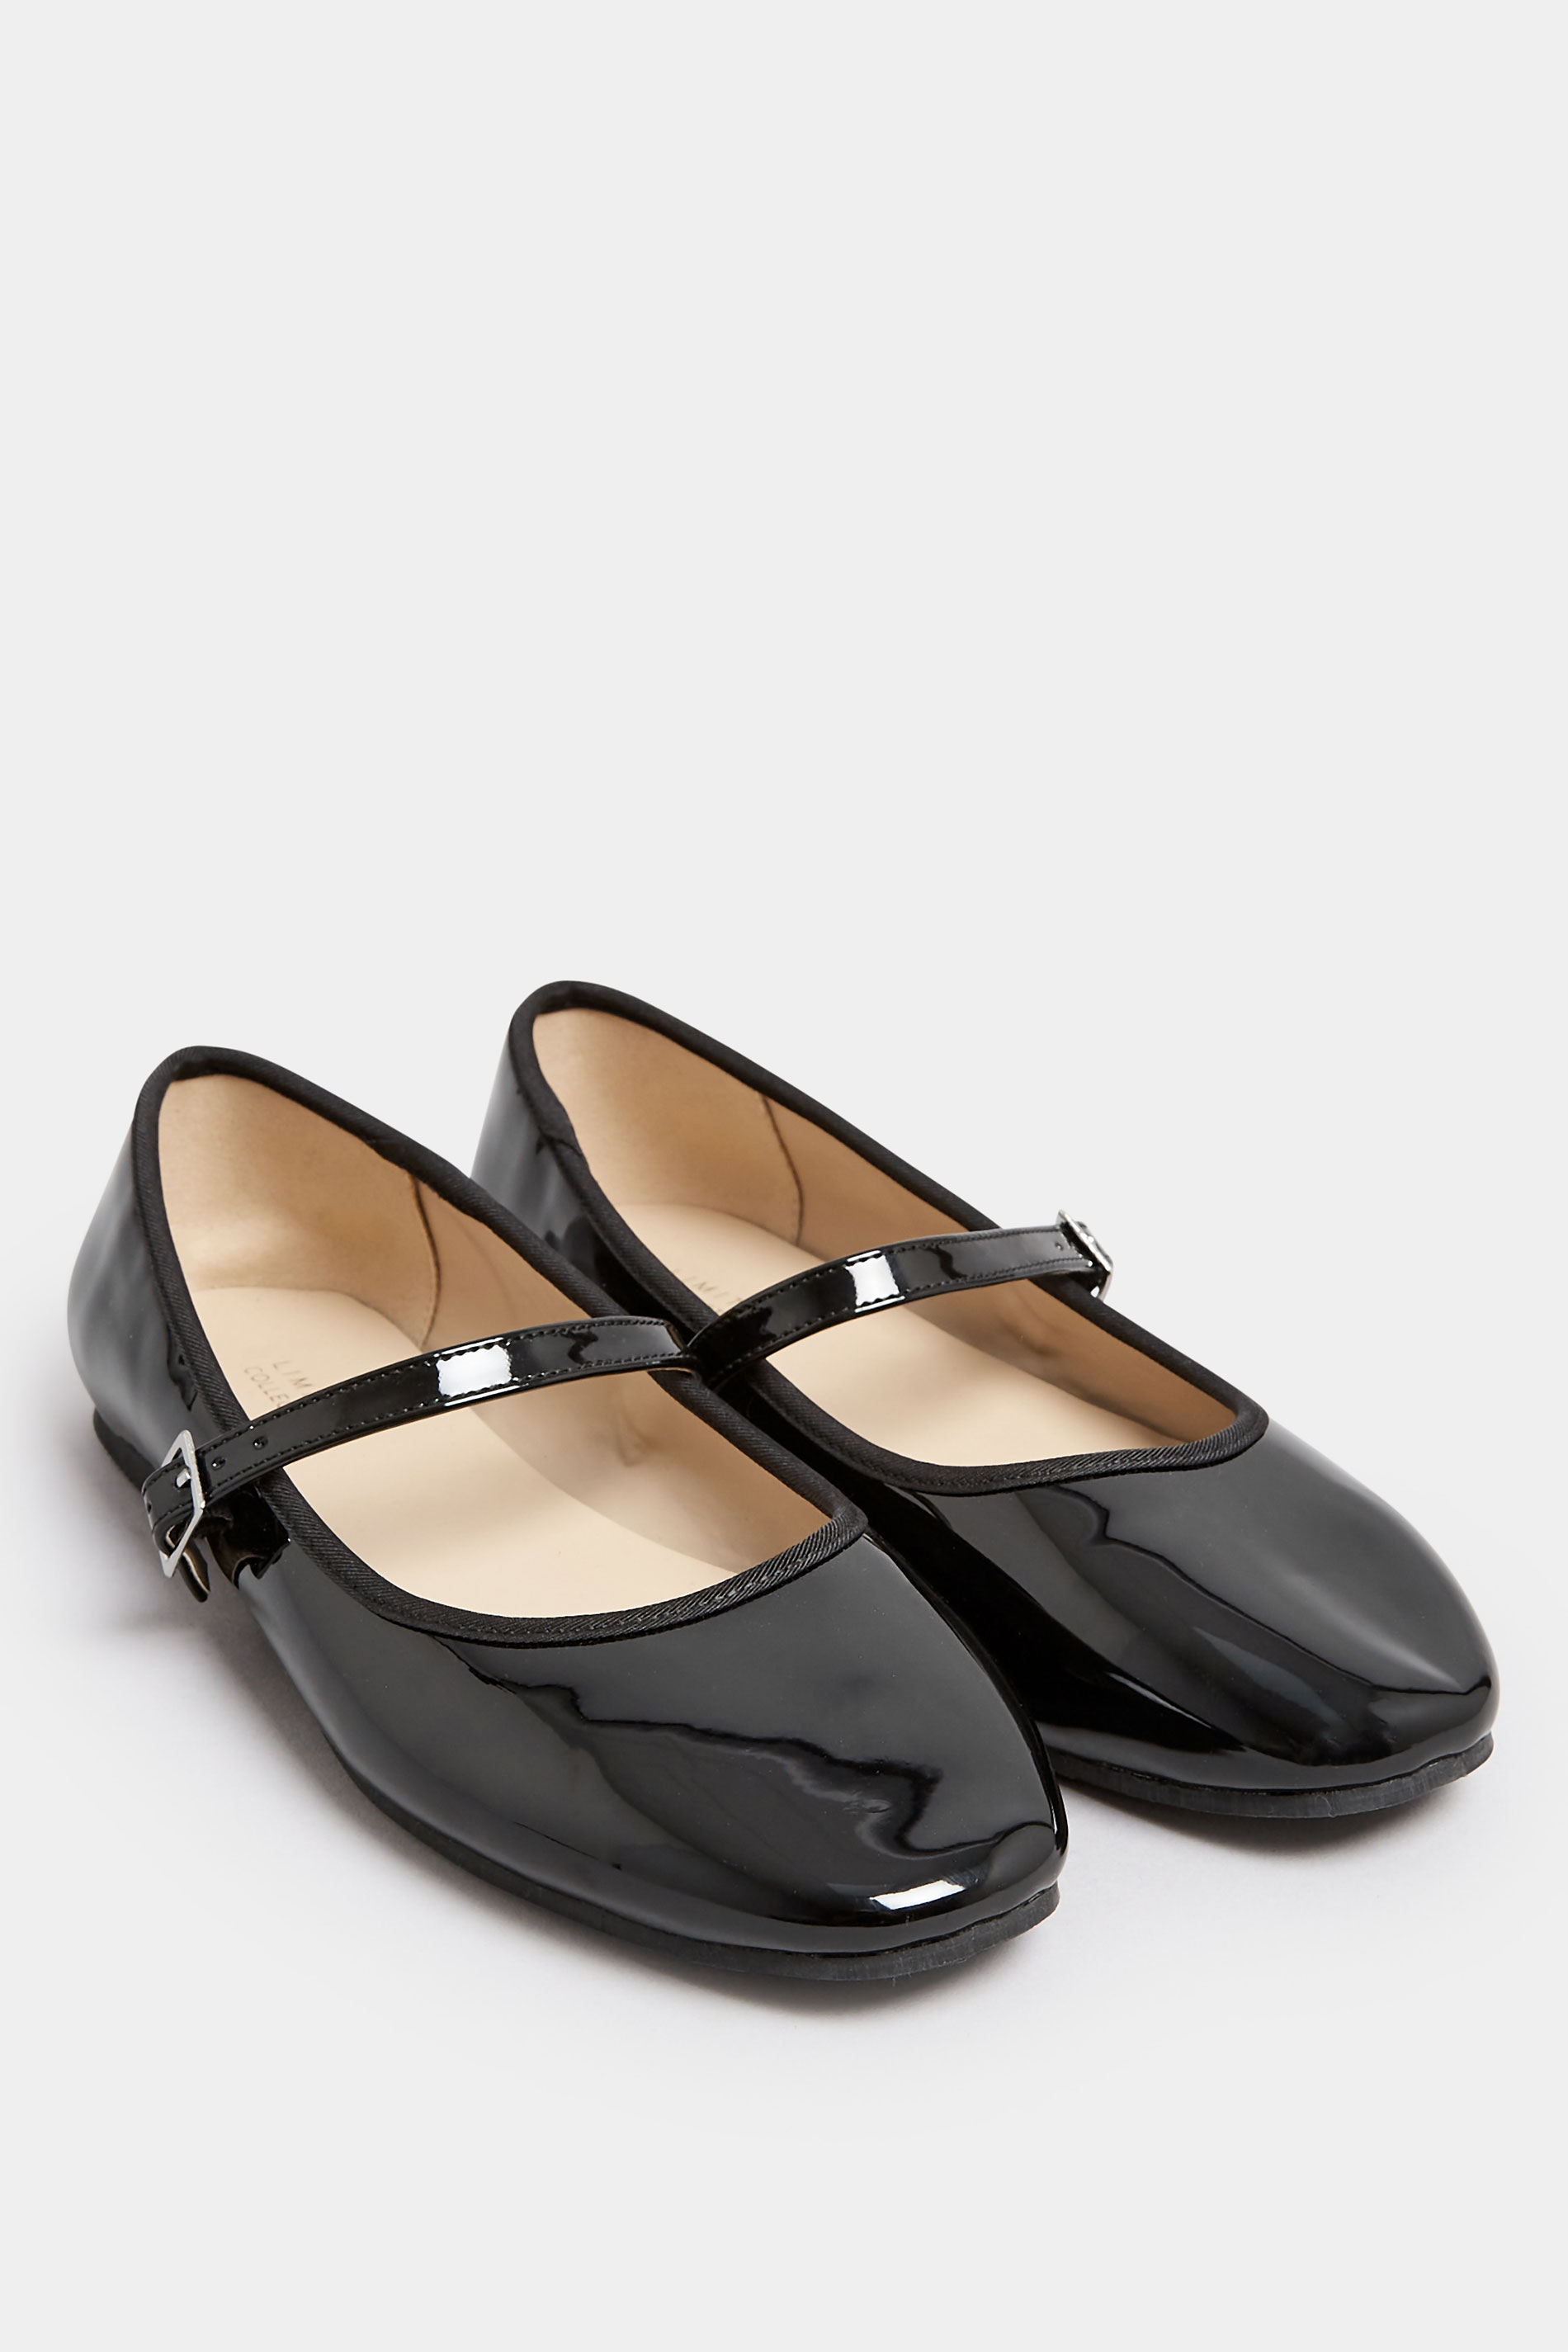 Black Patent Mary Jane Ballerina Pumps In Wide E Fit & Extra Wide EEE Fit | Yours Clothing  2